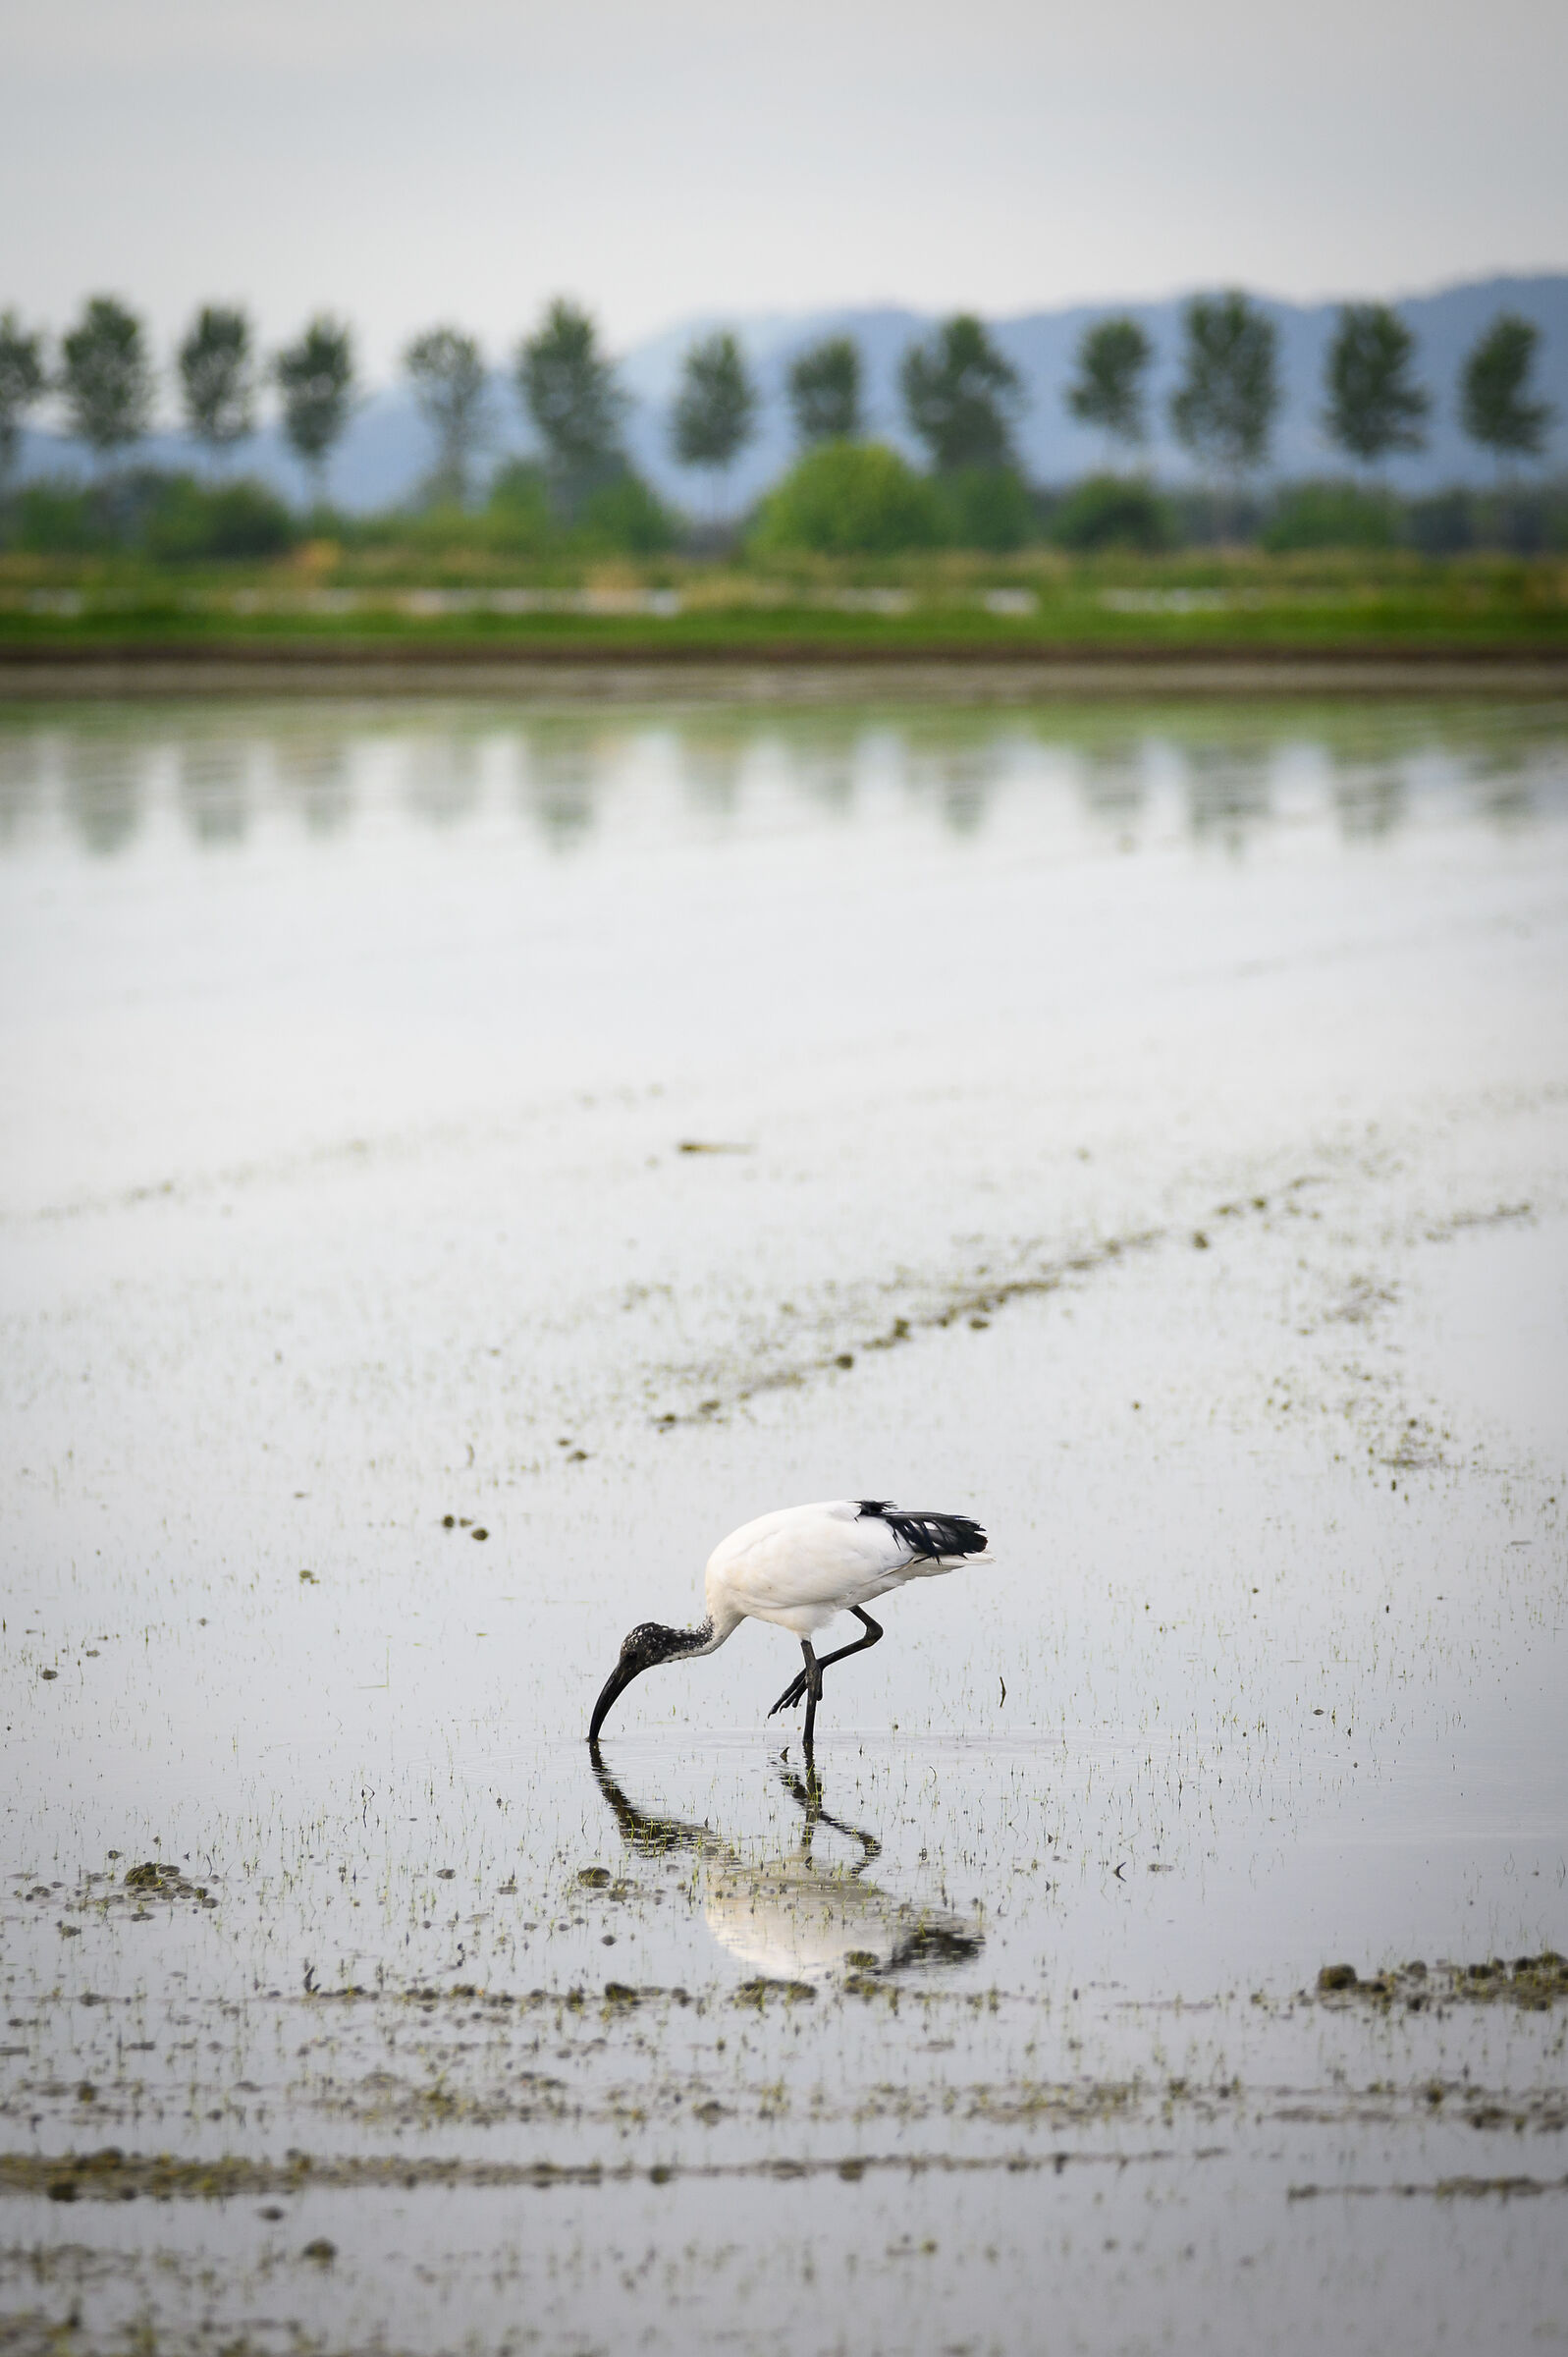 Sacred Ibis, in the vercellese rice paddies....